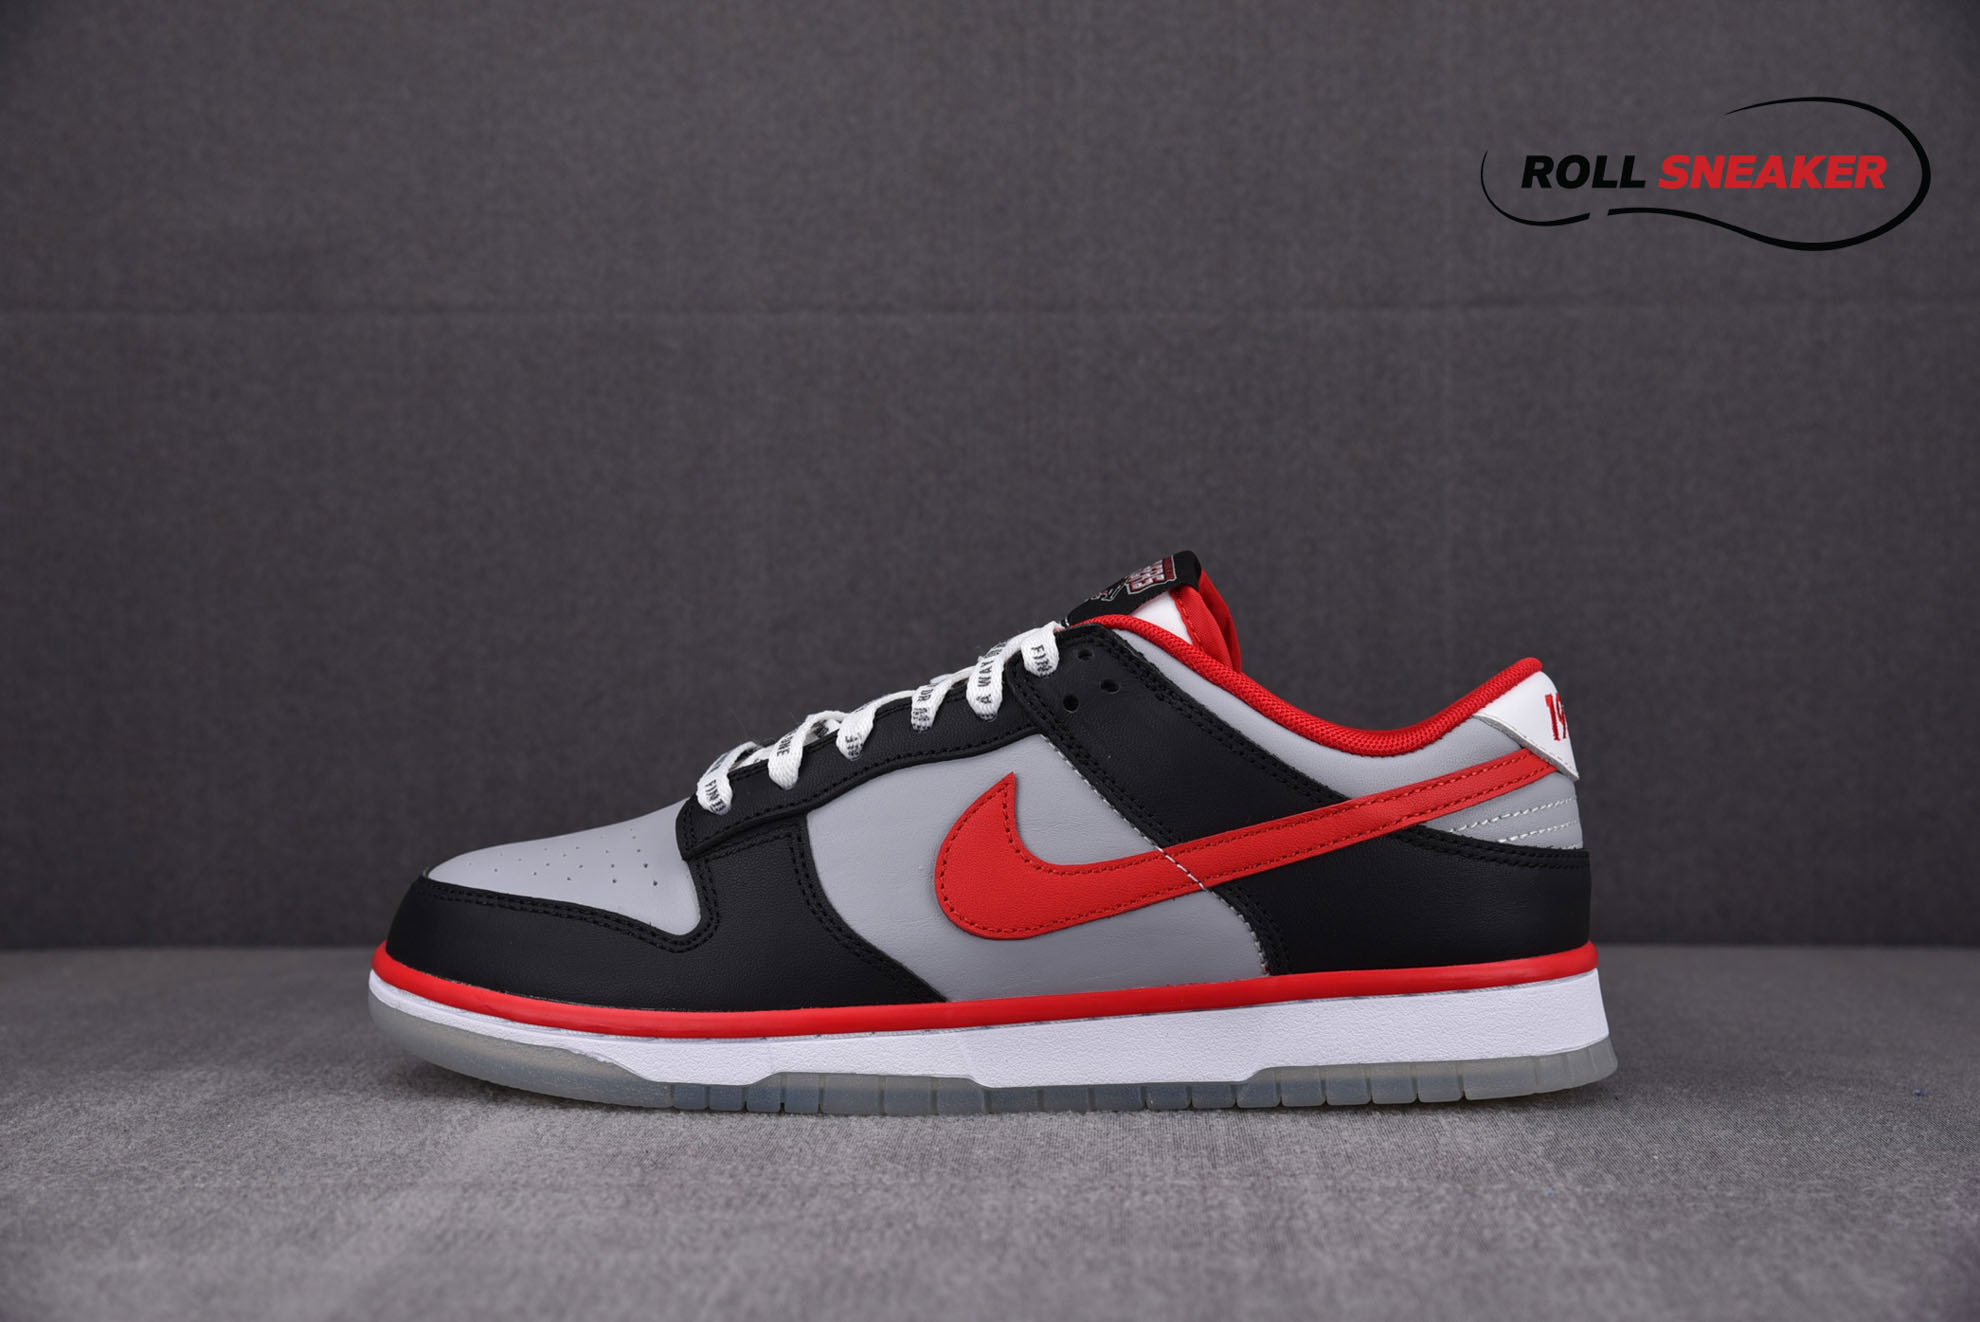 Nike Dunk Low "CAU" Receives October Release Date